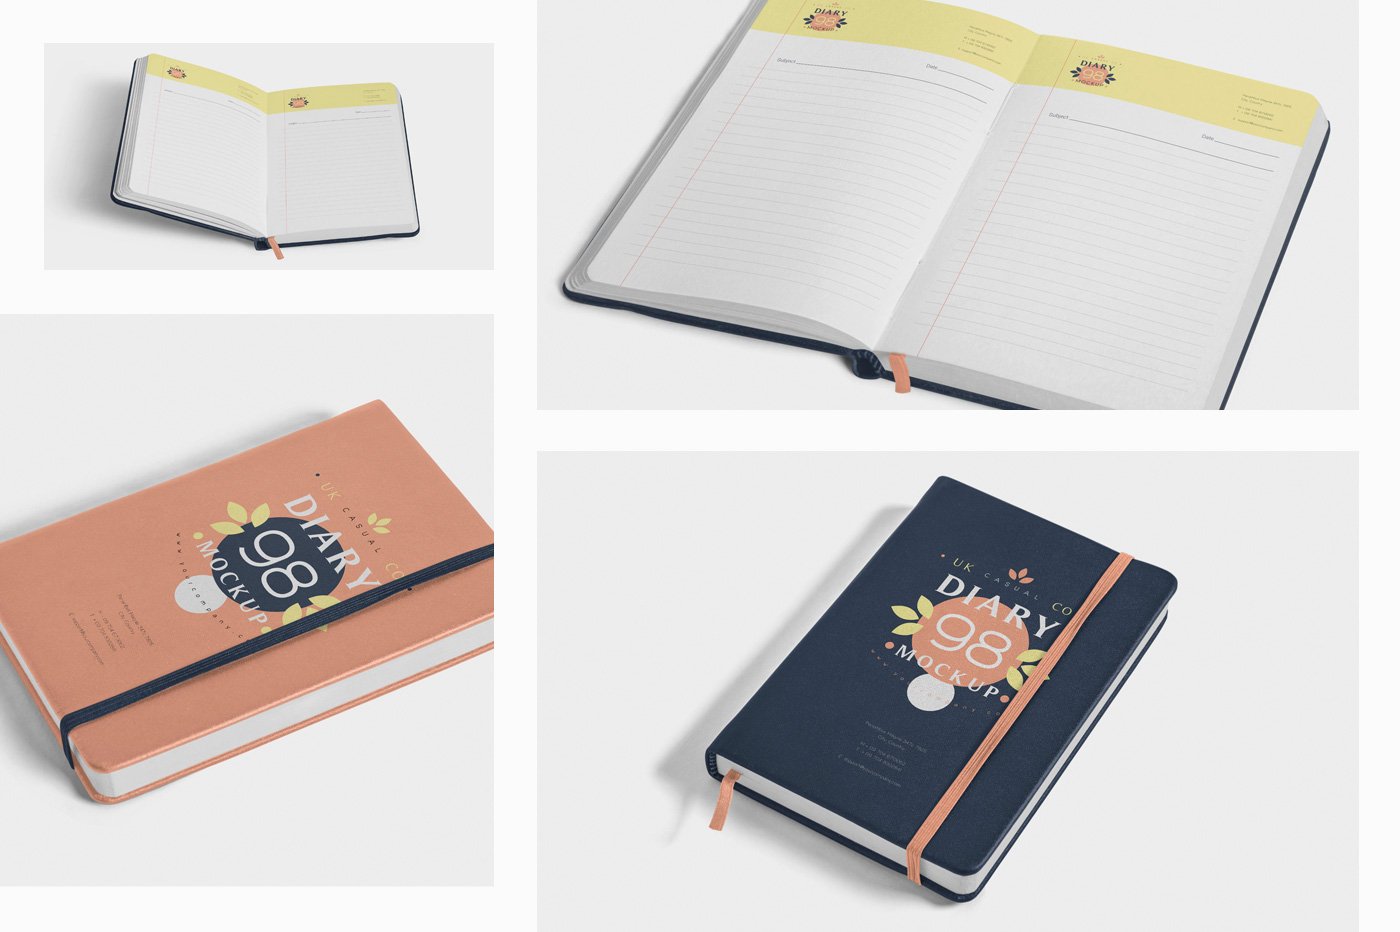 Some notebook options with the flowers.